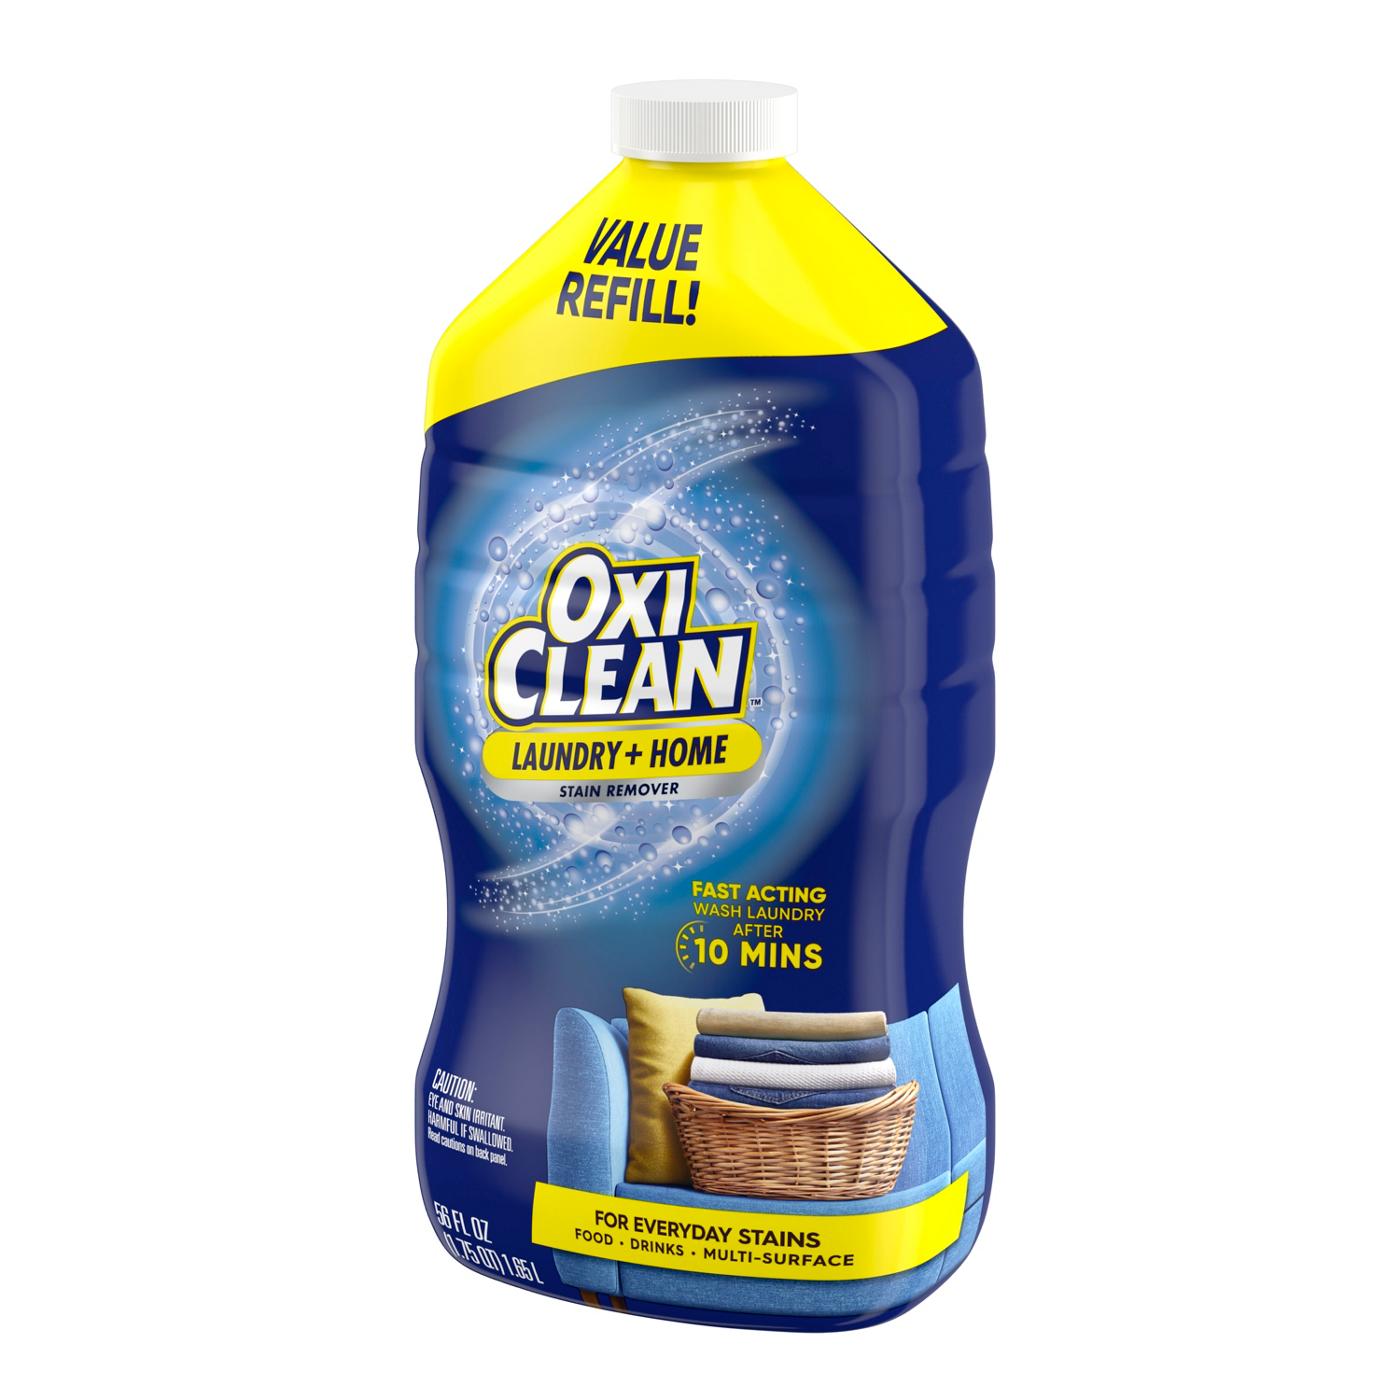 OxiClean Laundry & Home Stain Remover Refill; image 4 of 4